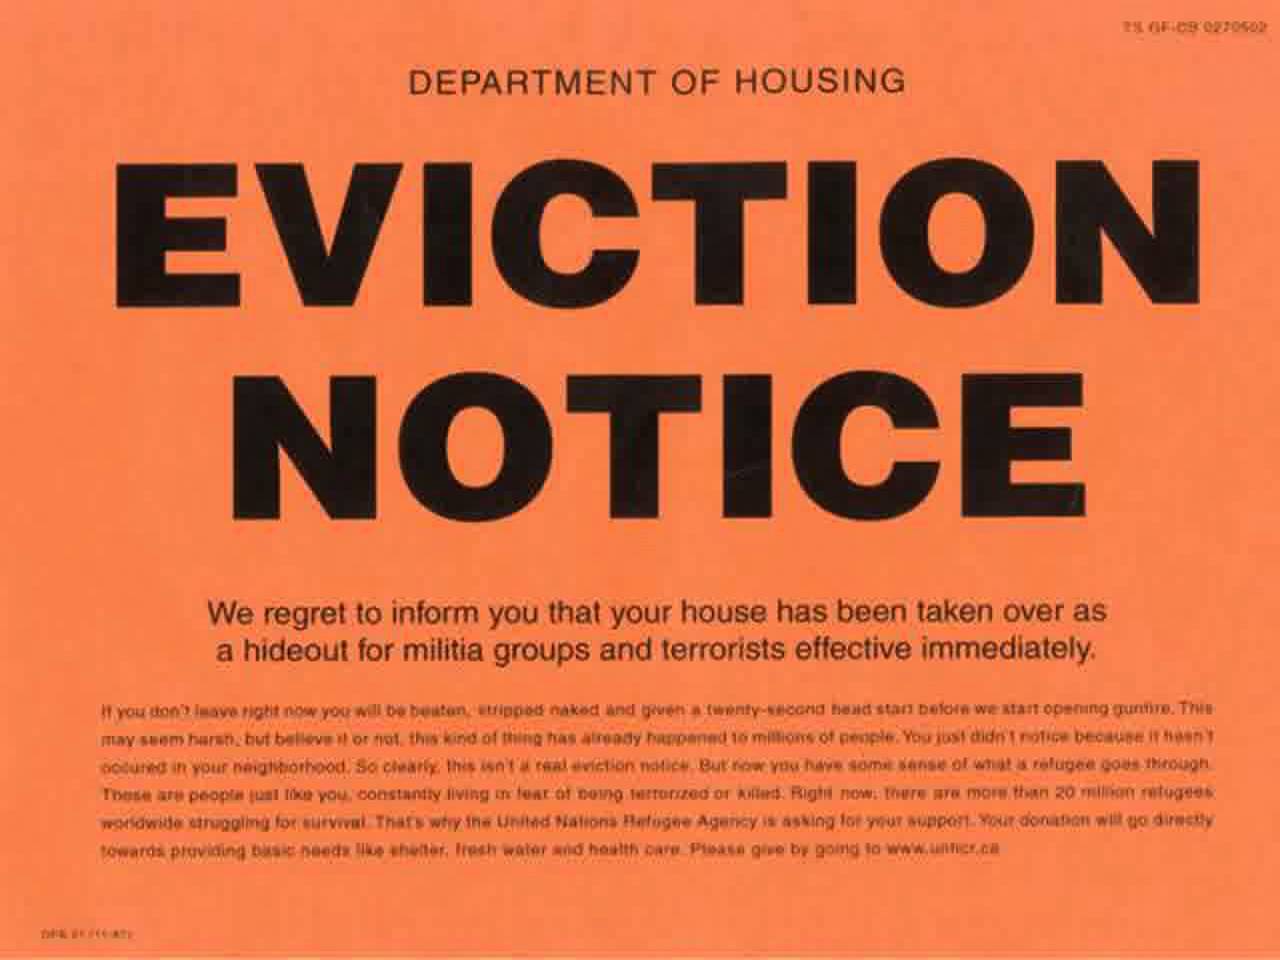 4+ eviction notice template uk | gcsemaths revision